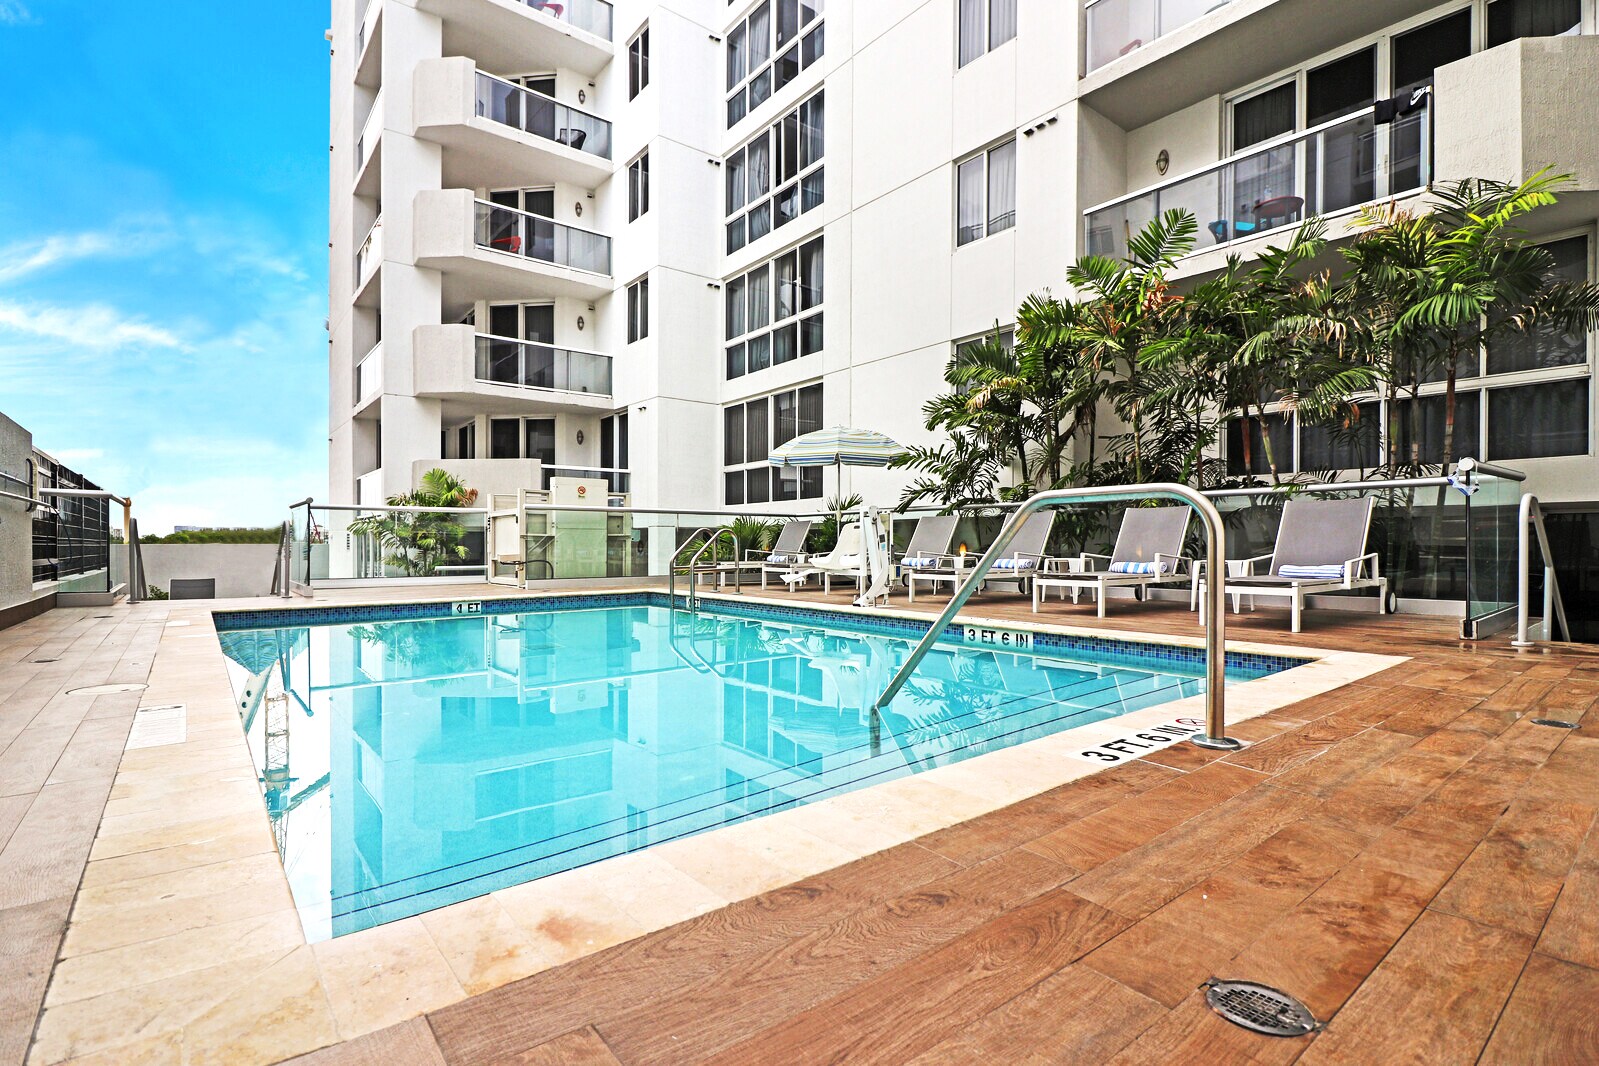 Unwind on a lounger with your favorite glass of wine or take a dip in the pool.